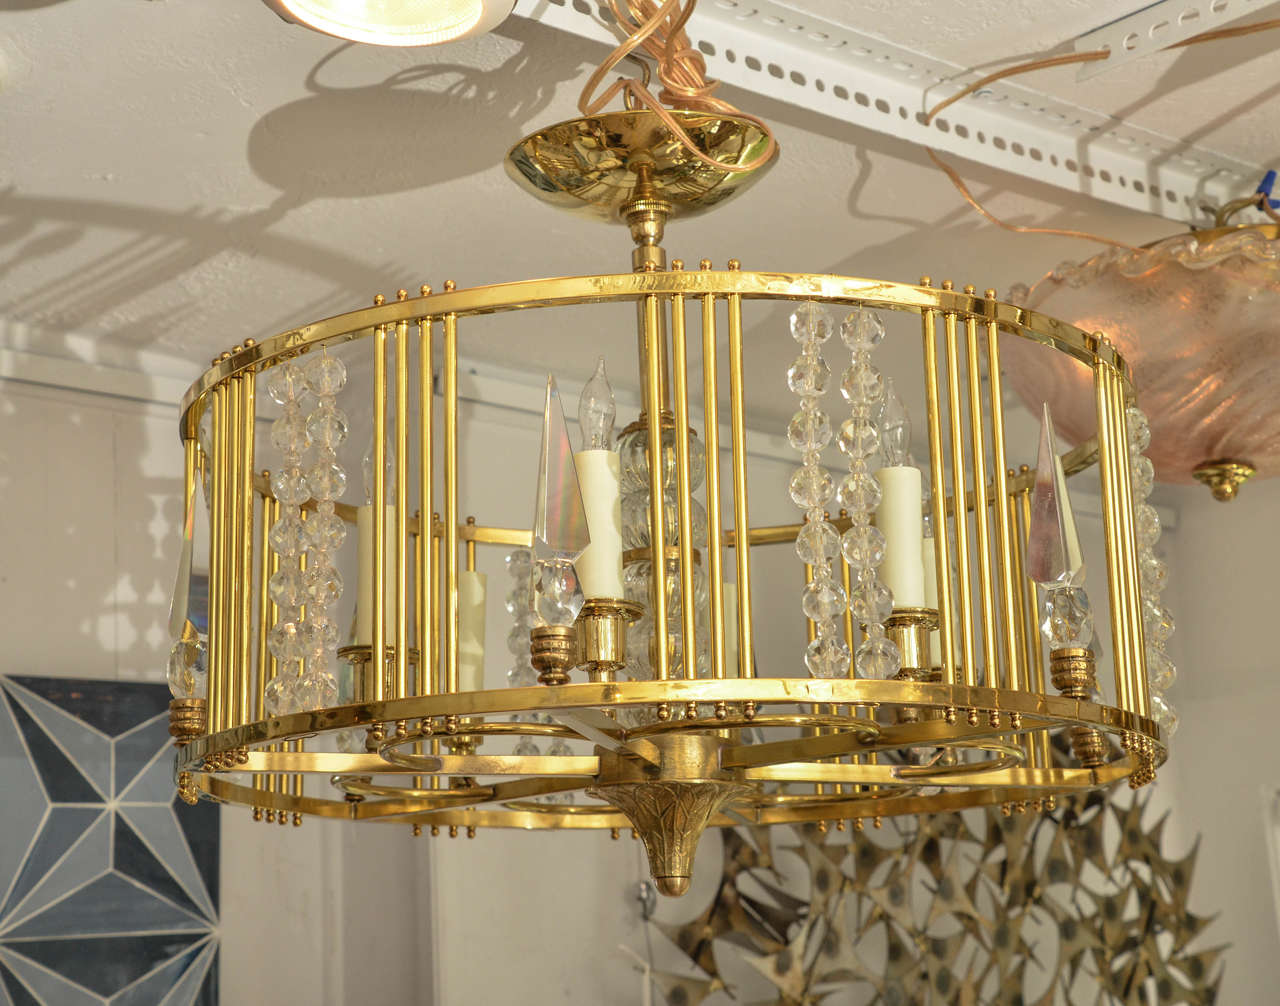 Drum form brass chandelier with decorative bead and prism details.